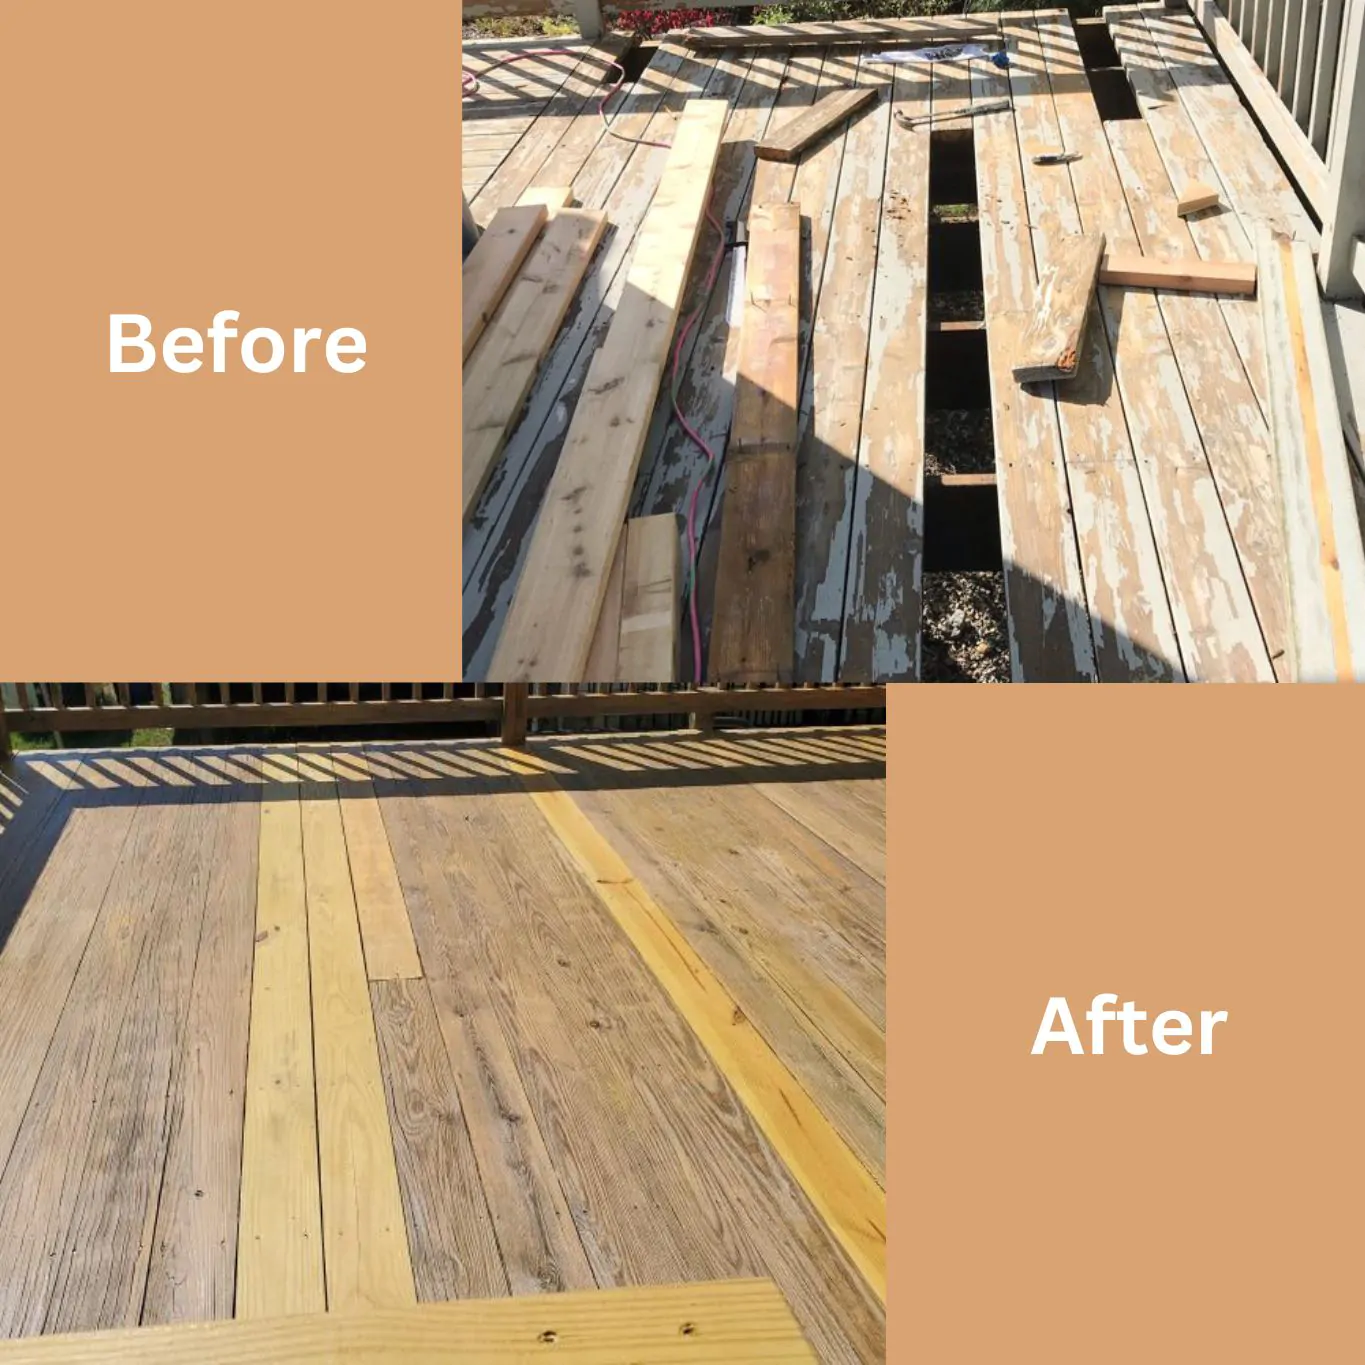 Before and After Deck Repair Services - All Pro Cherry Hill Deck Builders